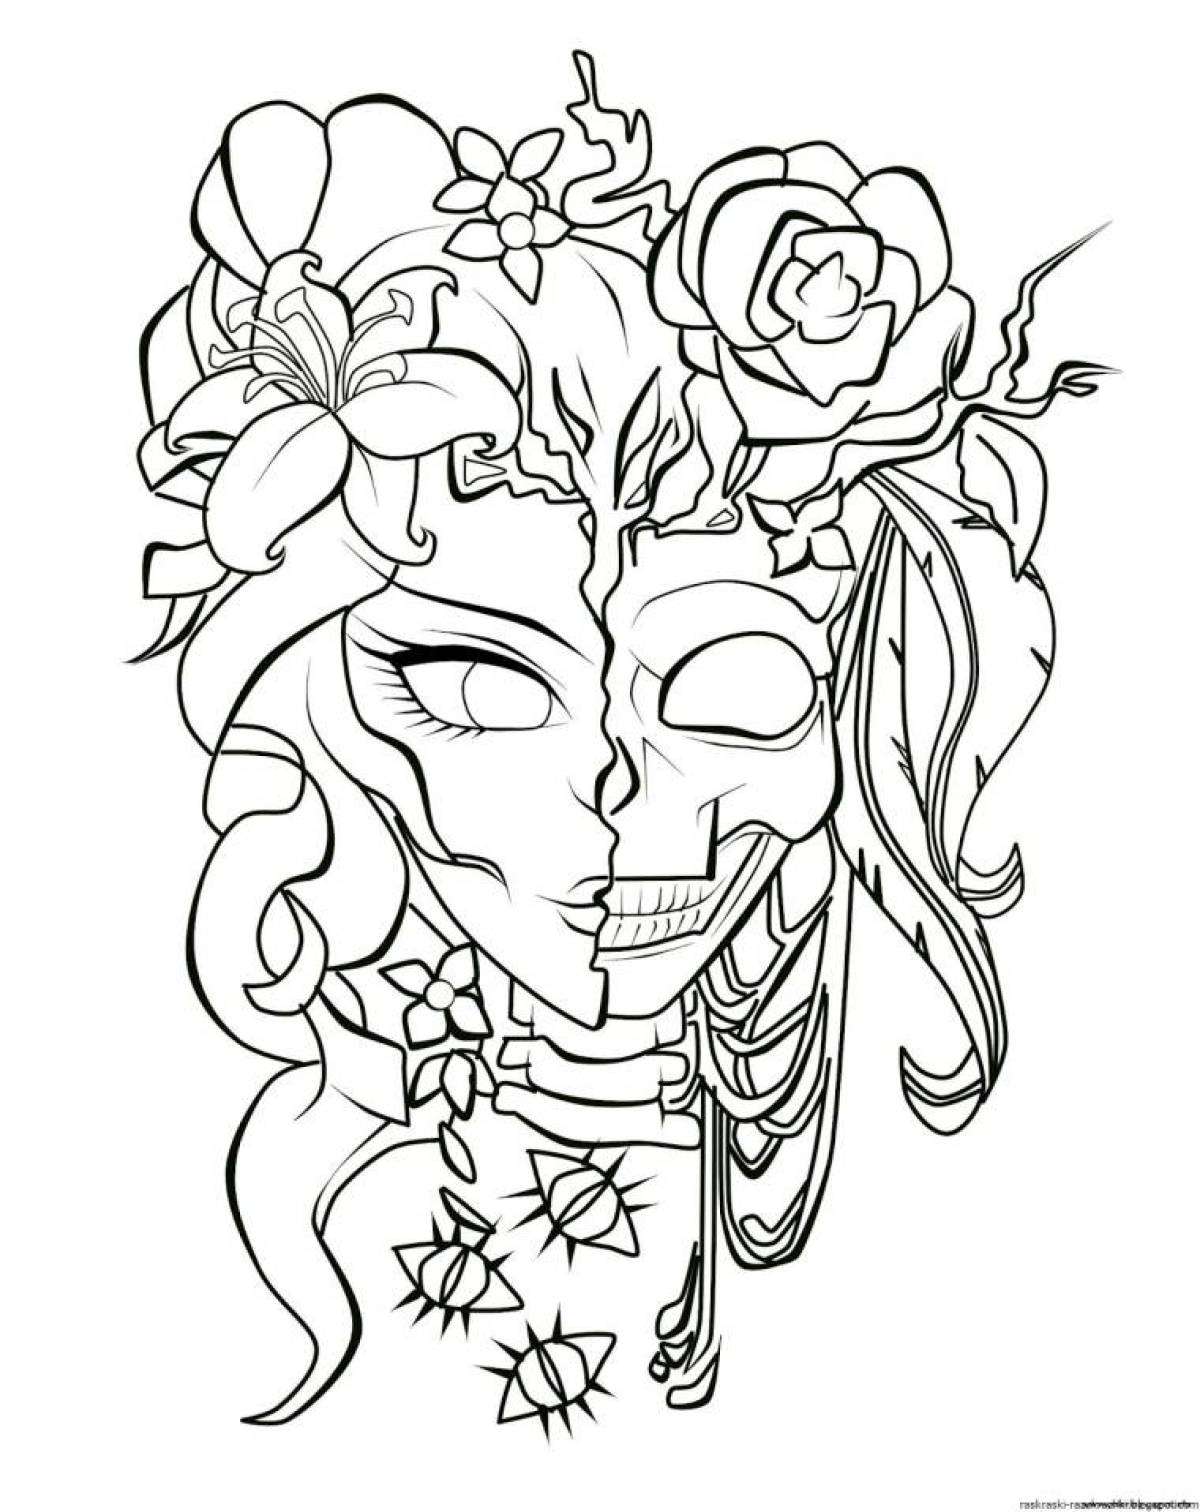 Mysterious tattoo coloring book